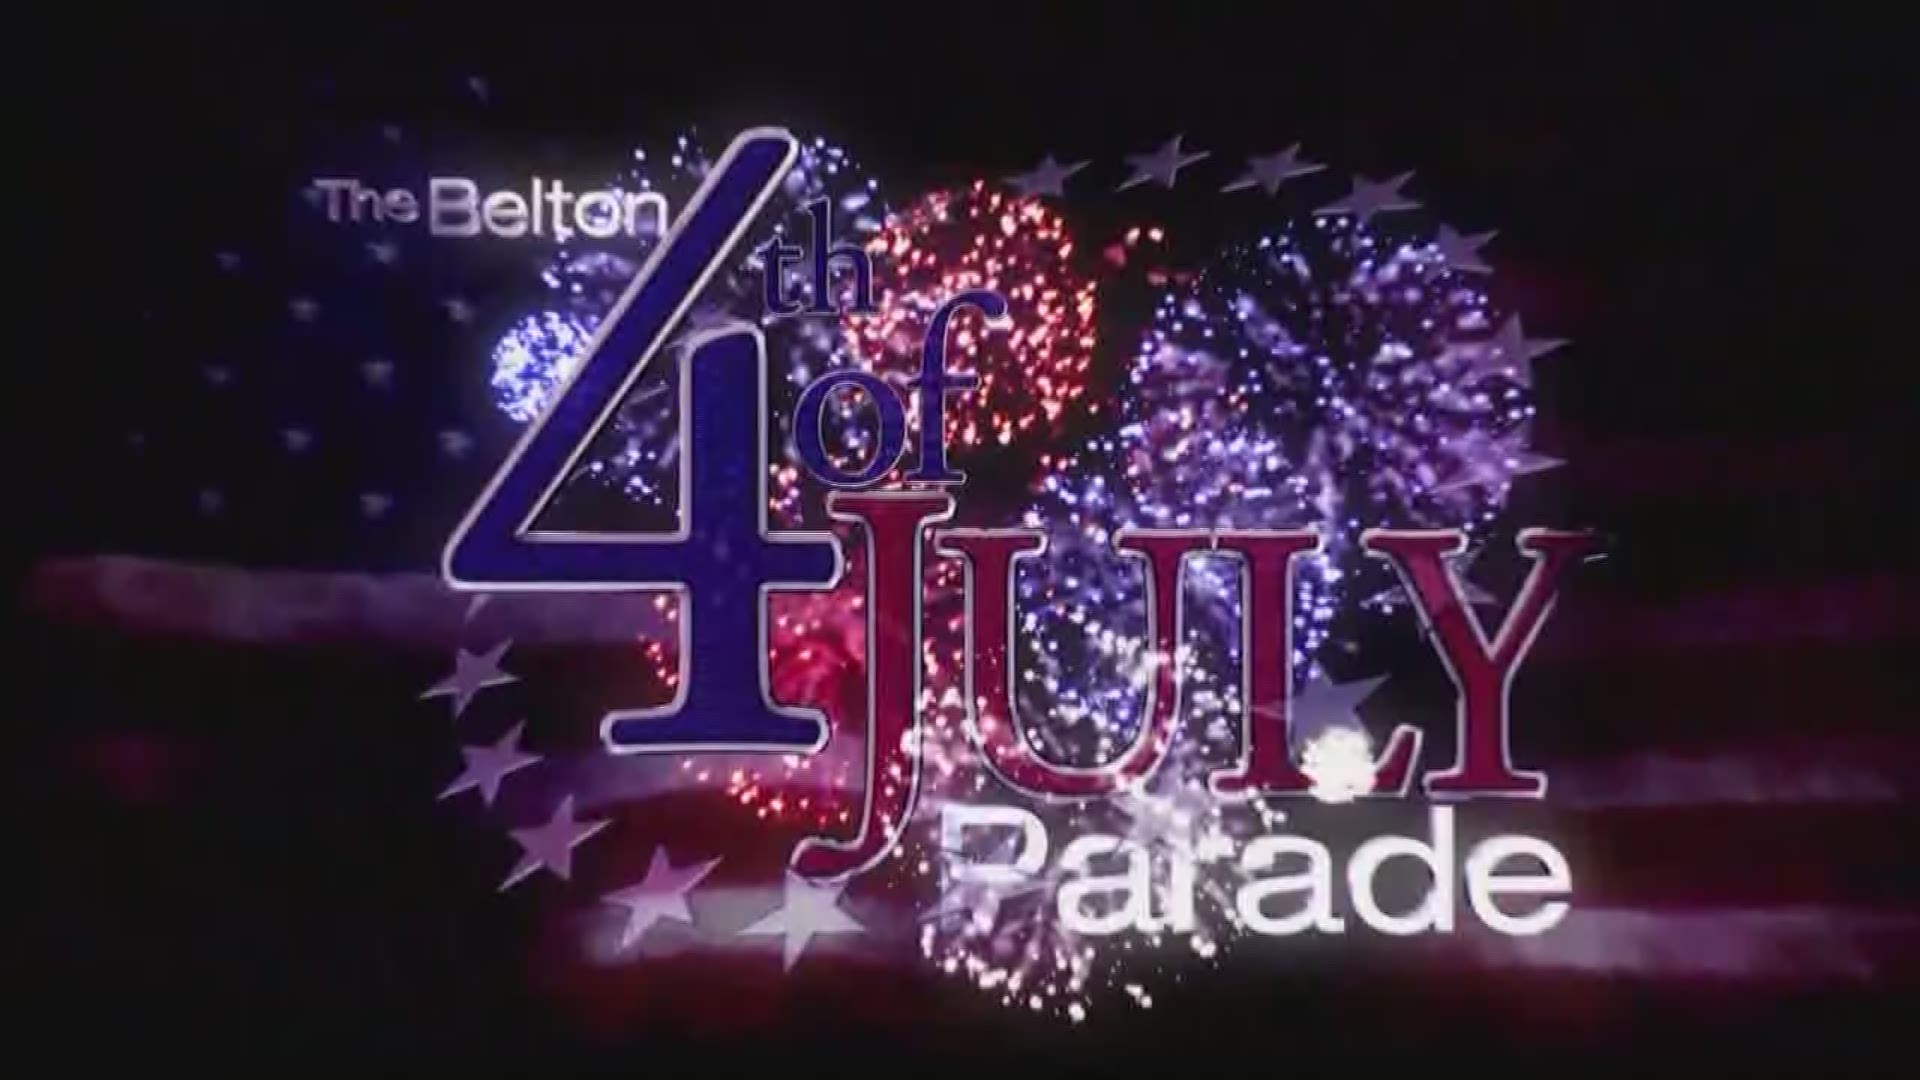 The 100th Belton 4th of July Parade brought more than 30,000 people to the community.